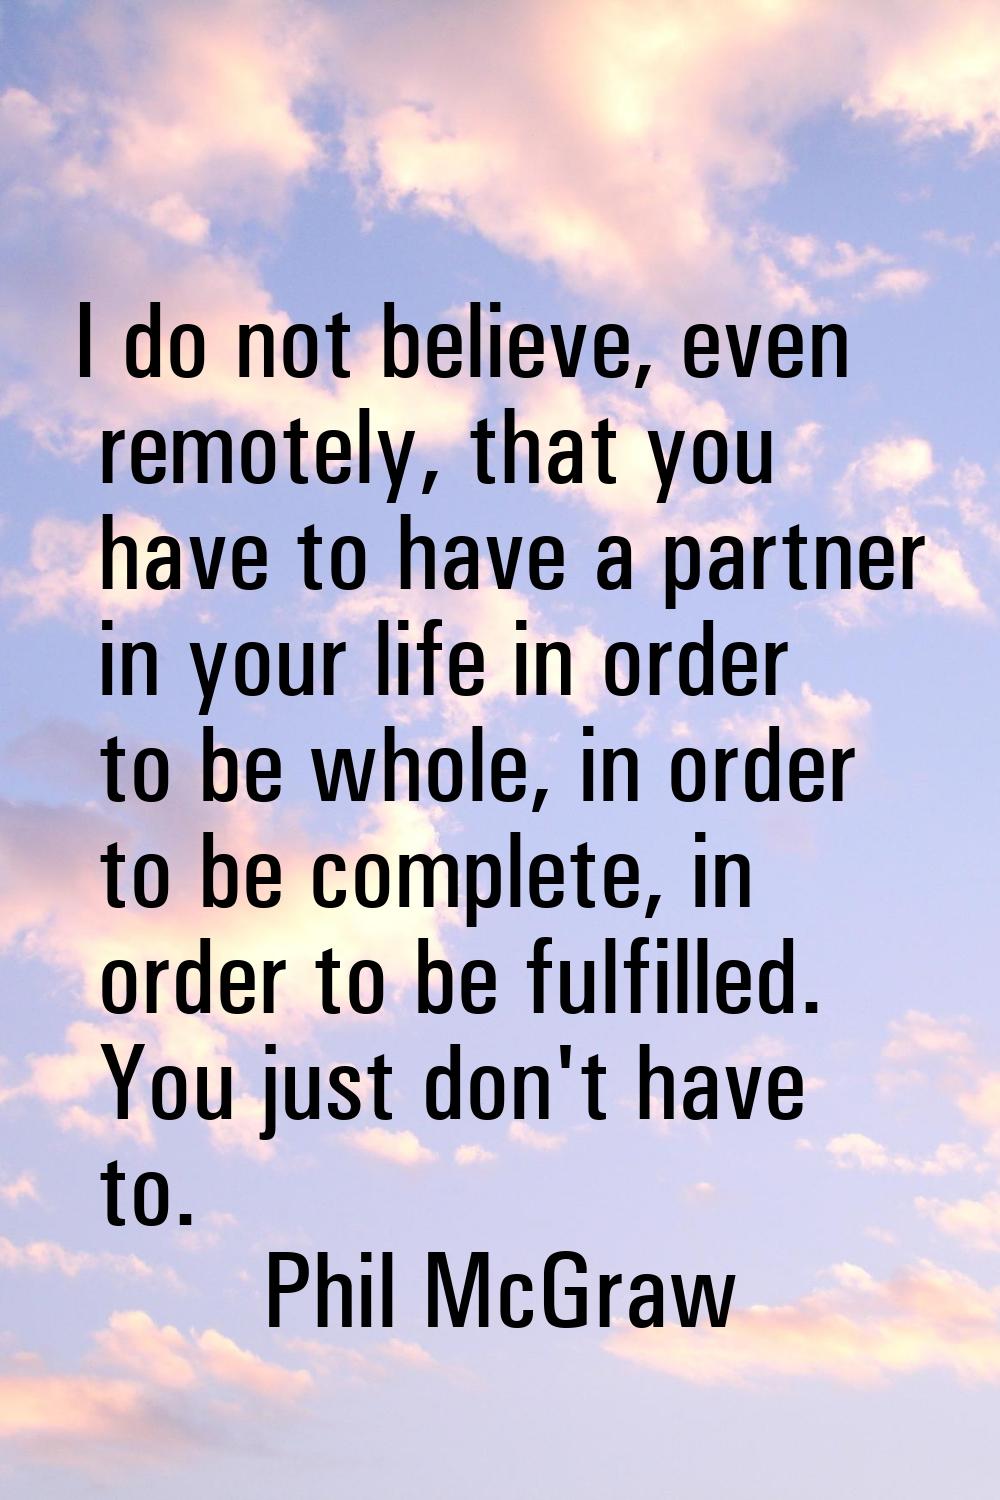 I do not believe, even remotely, that you have to have a partner in your life in order to be whole,